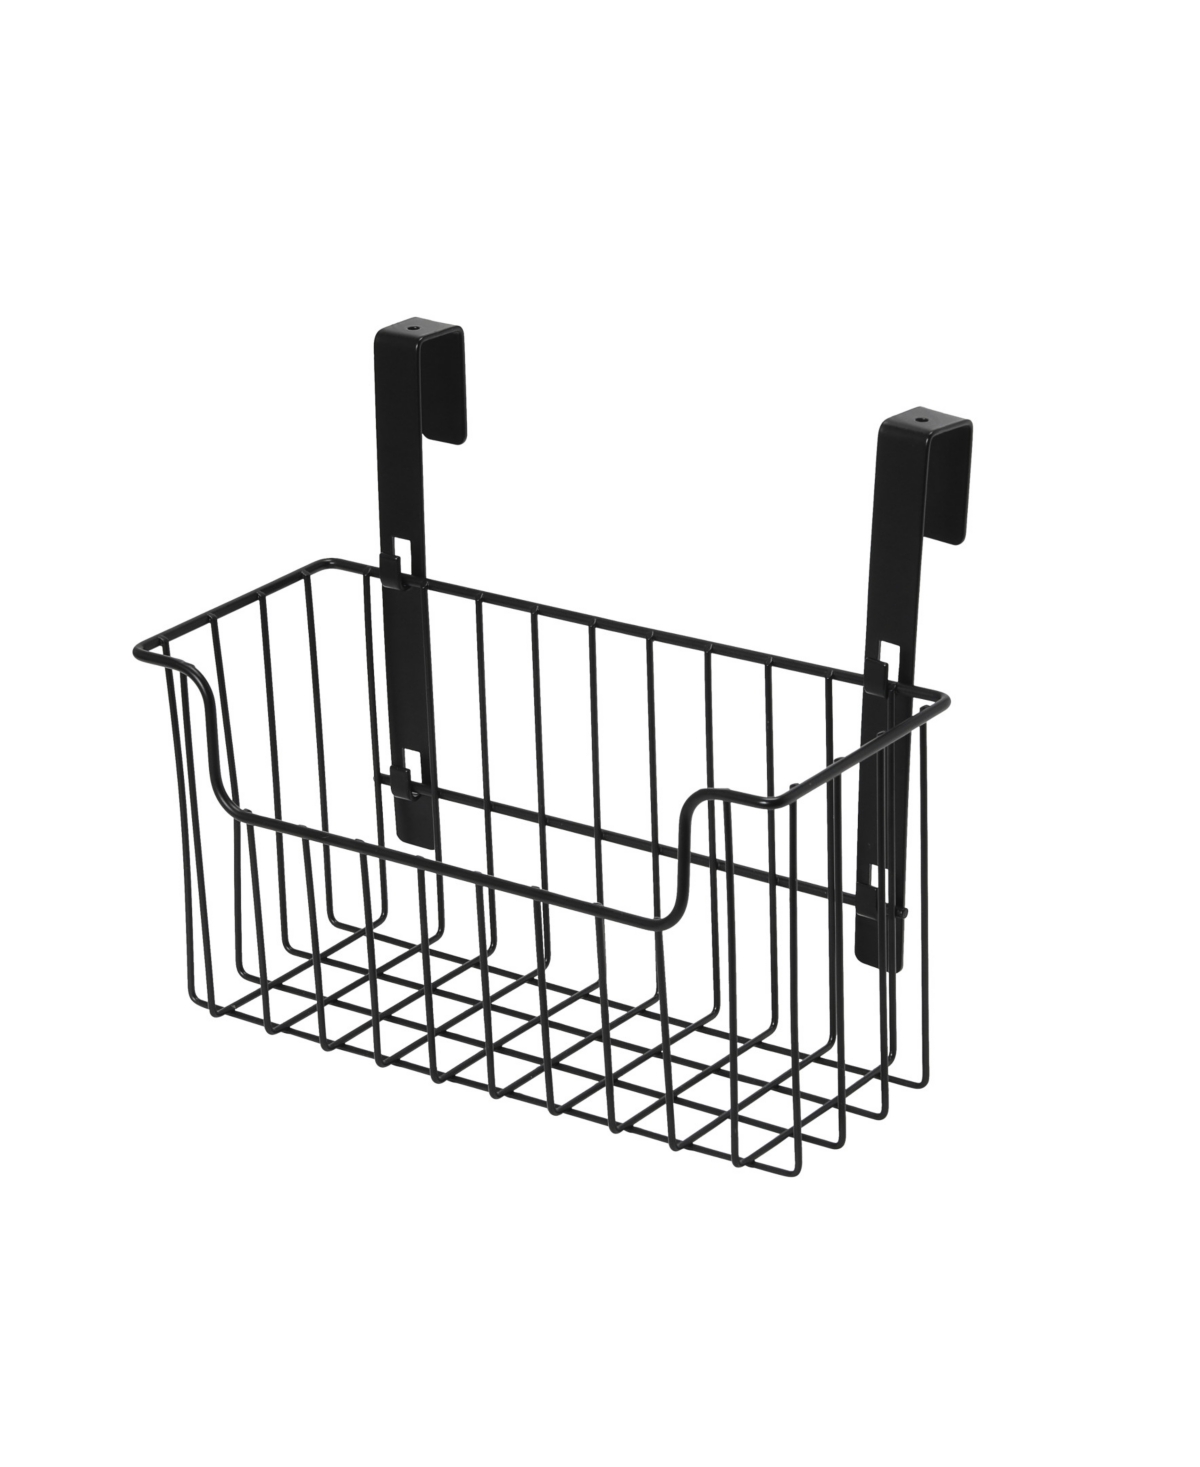 Over The Door Cut Out Basket - Black